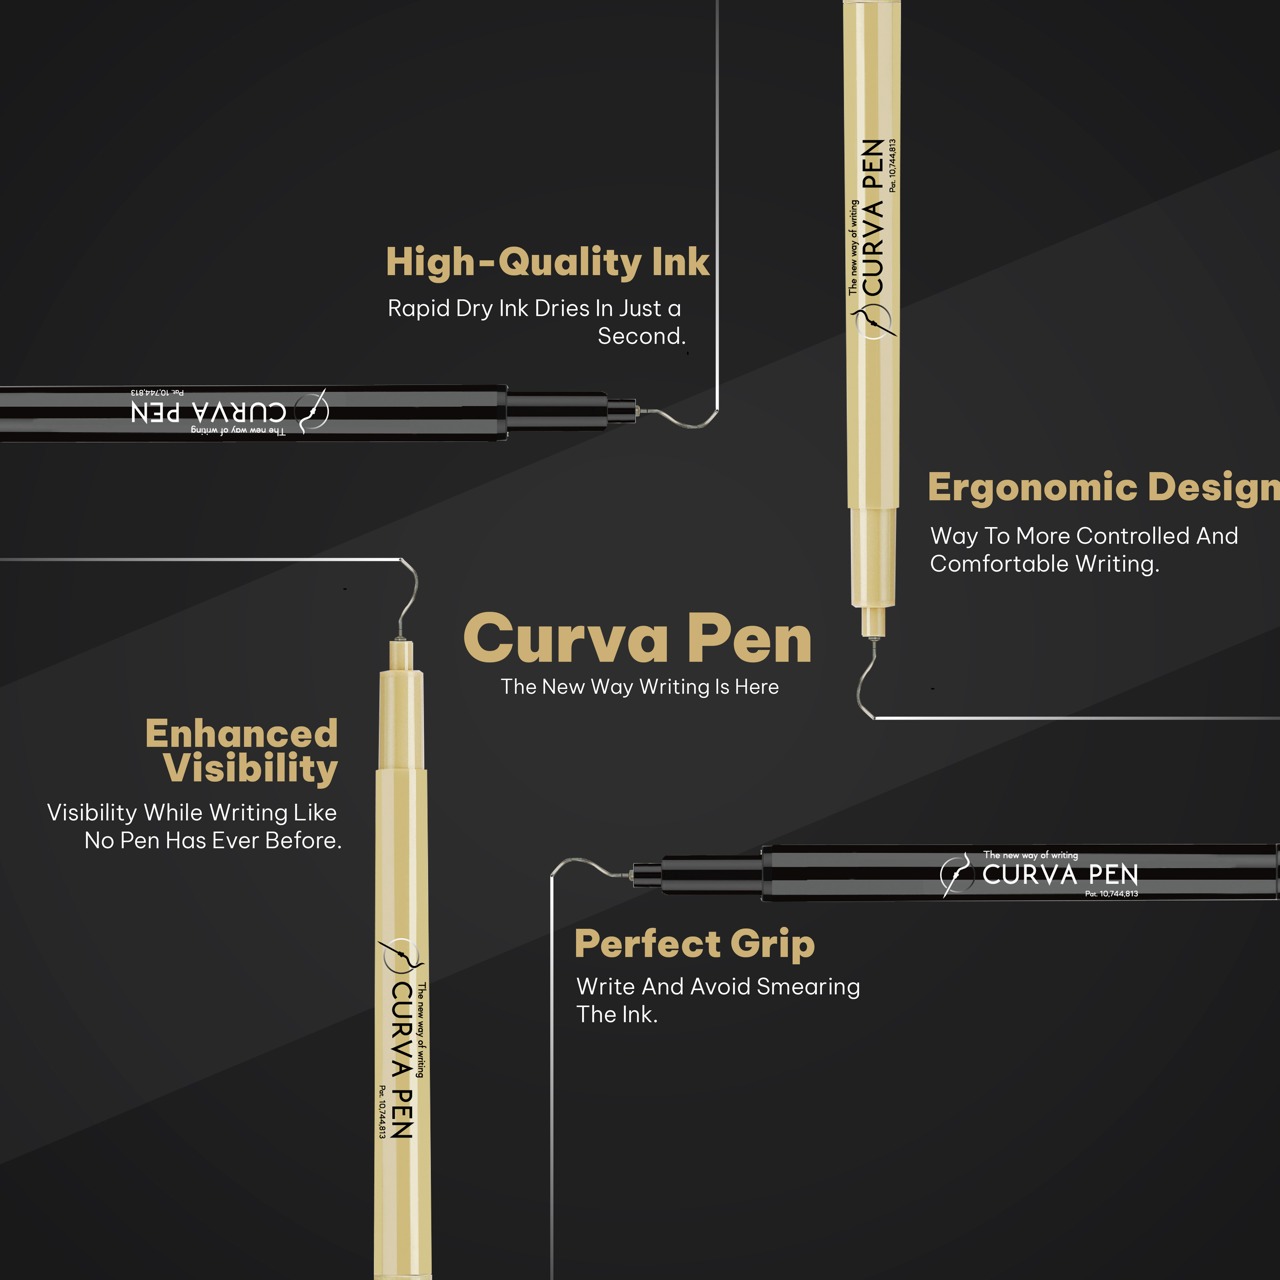 Empower your words and upgrade to Curva Pen for a writing